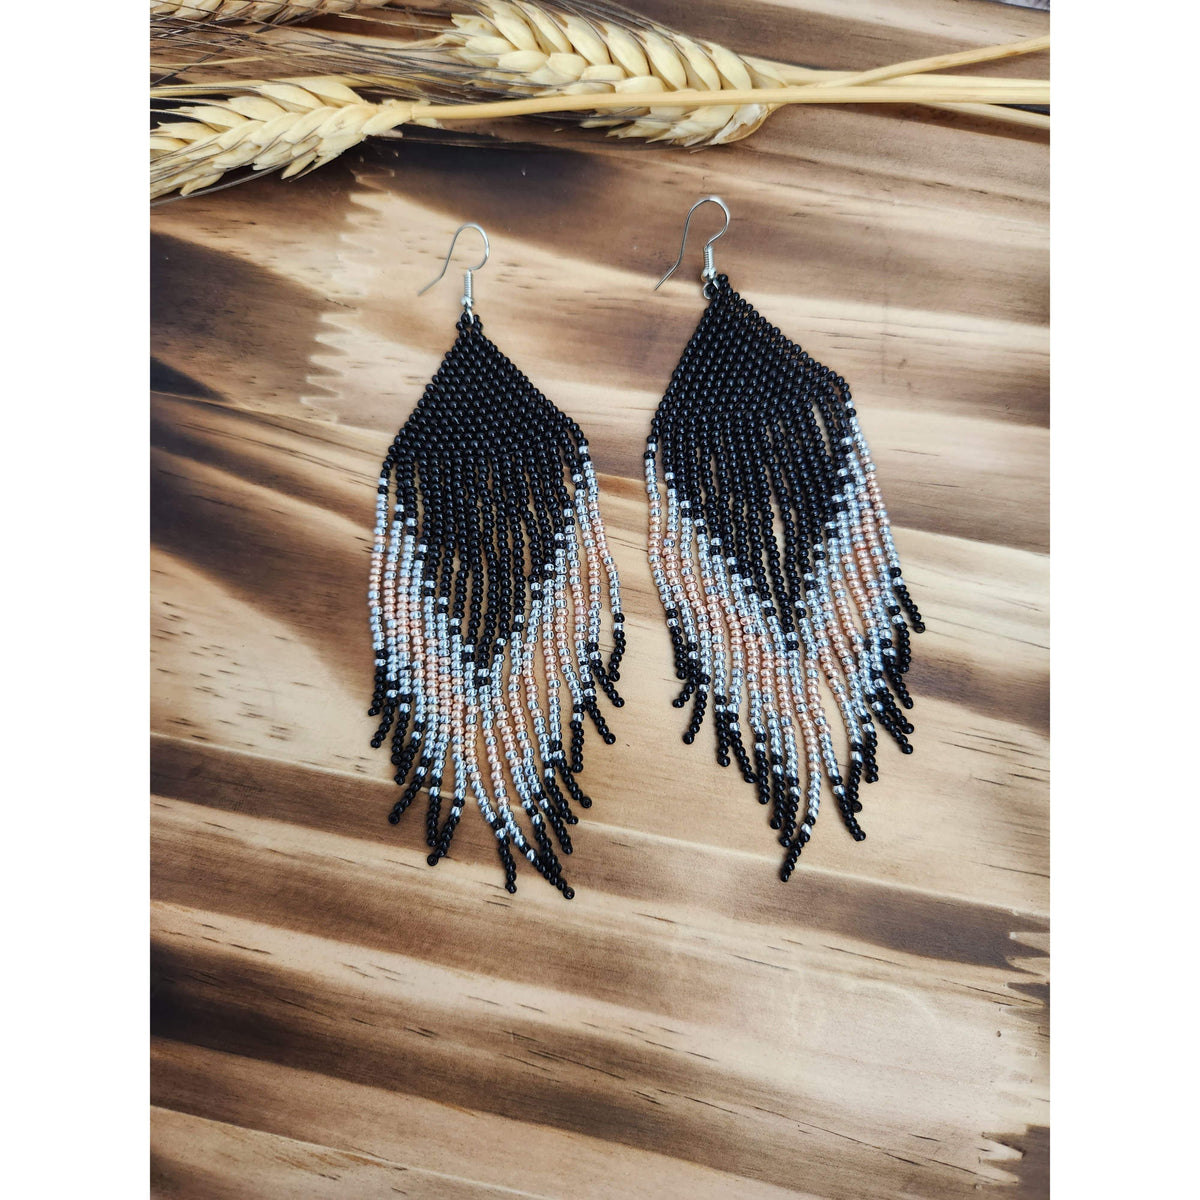 Into the Abyss Fringe Beaded Earrings Earrings TheFringeCultureCollective